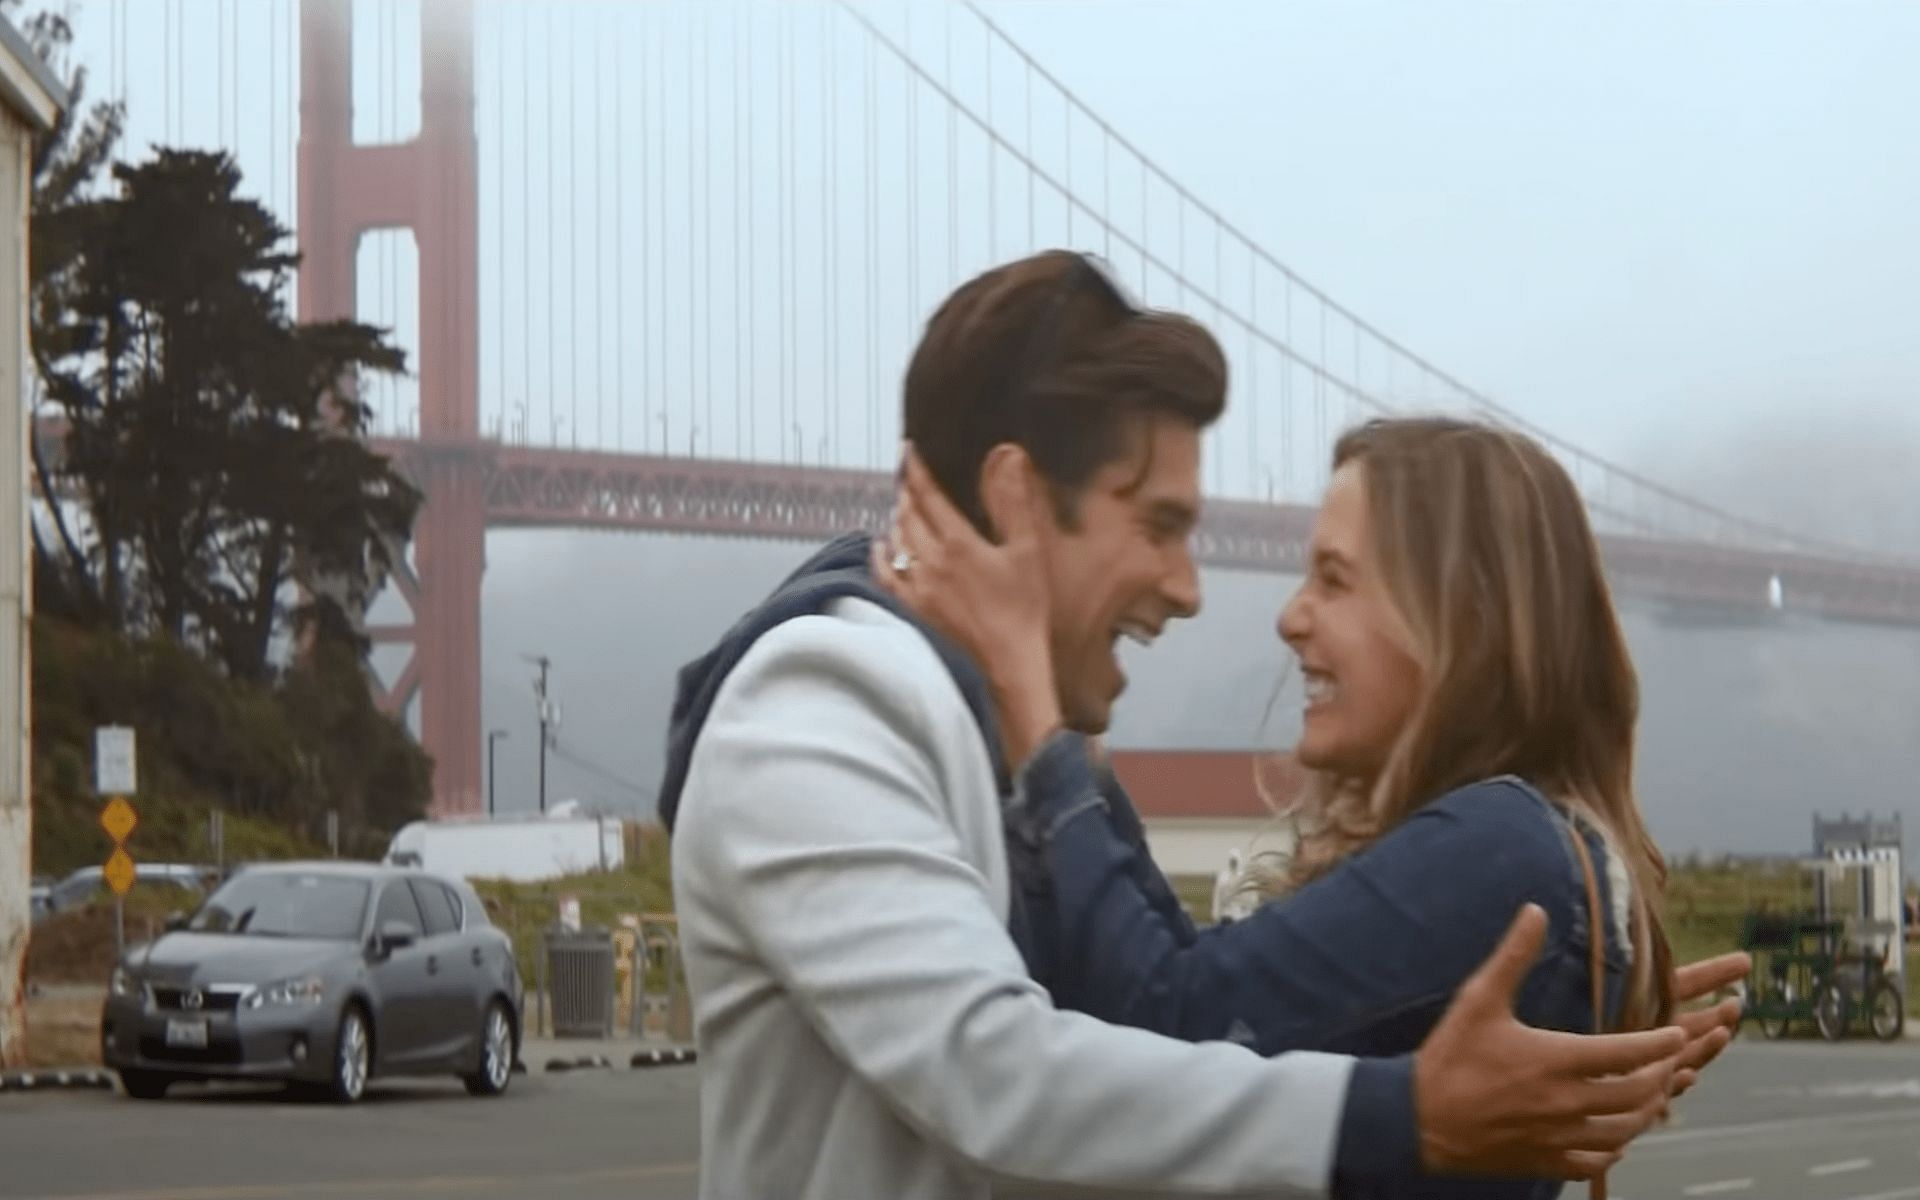 Where to watch 'A California Christmas City Lights'? Release date